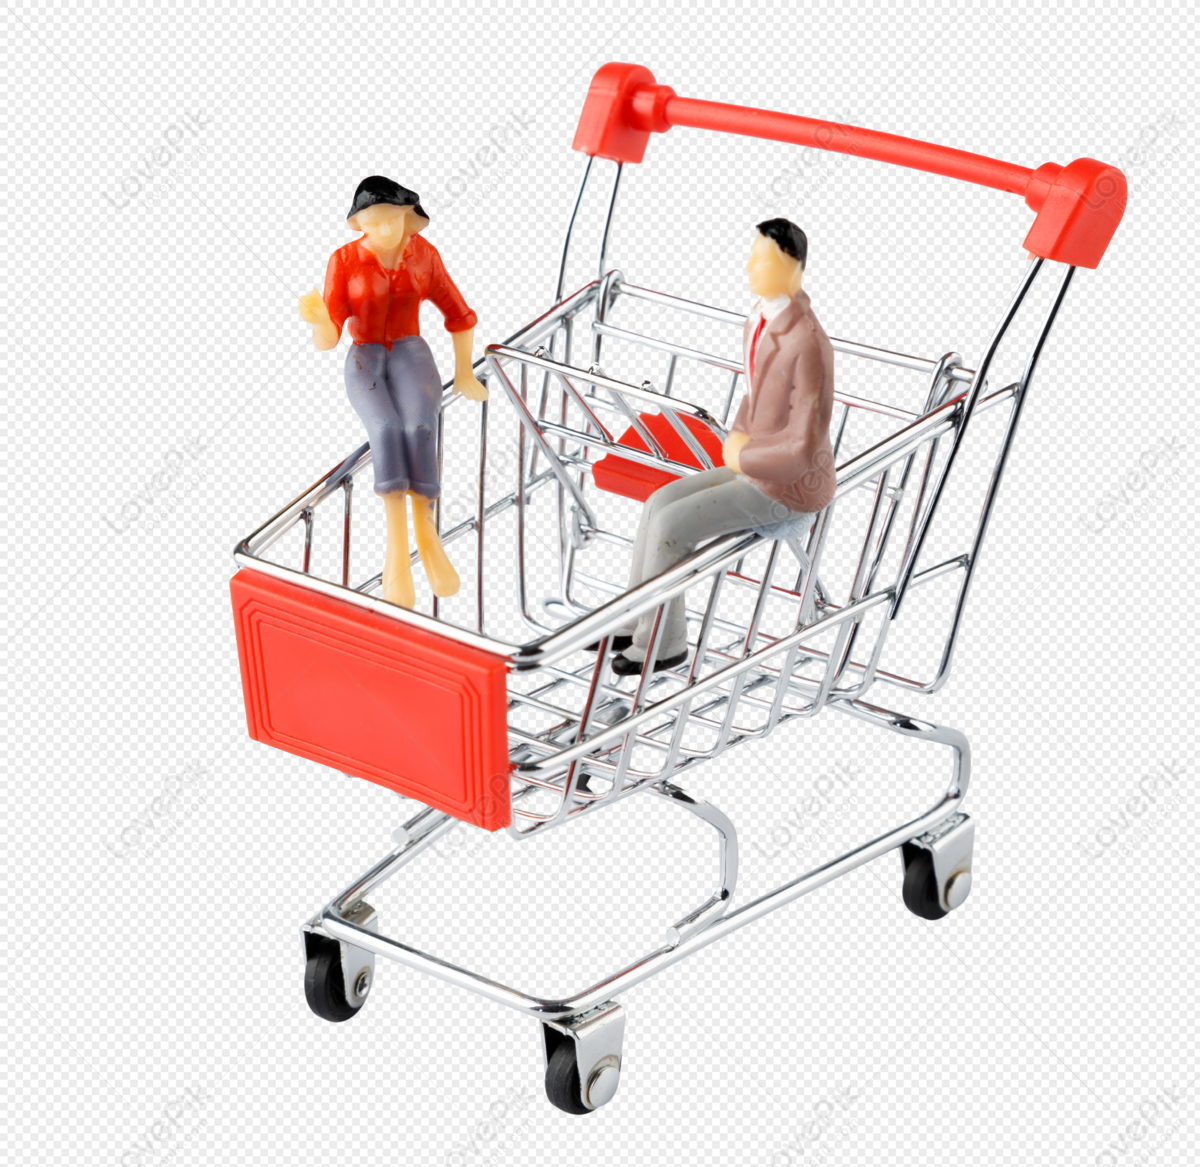 Cartoon Doll And Shopping Cart PNG Hd Transparent Image And Clipart Image  For Free Download - Lovepik | 400326674